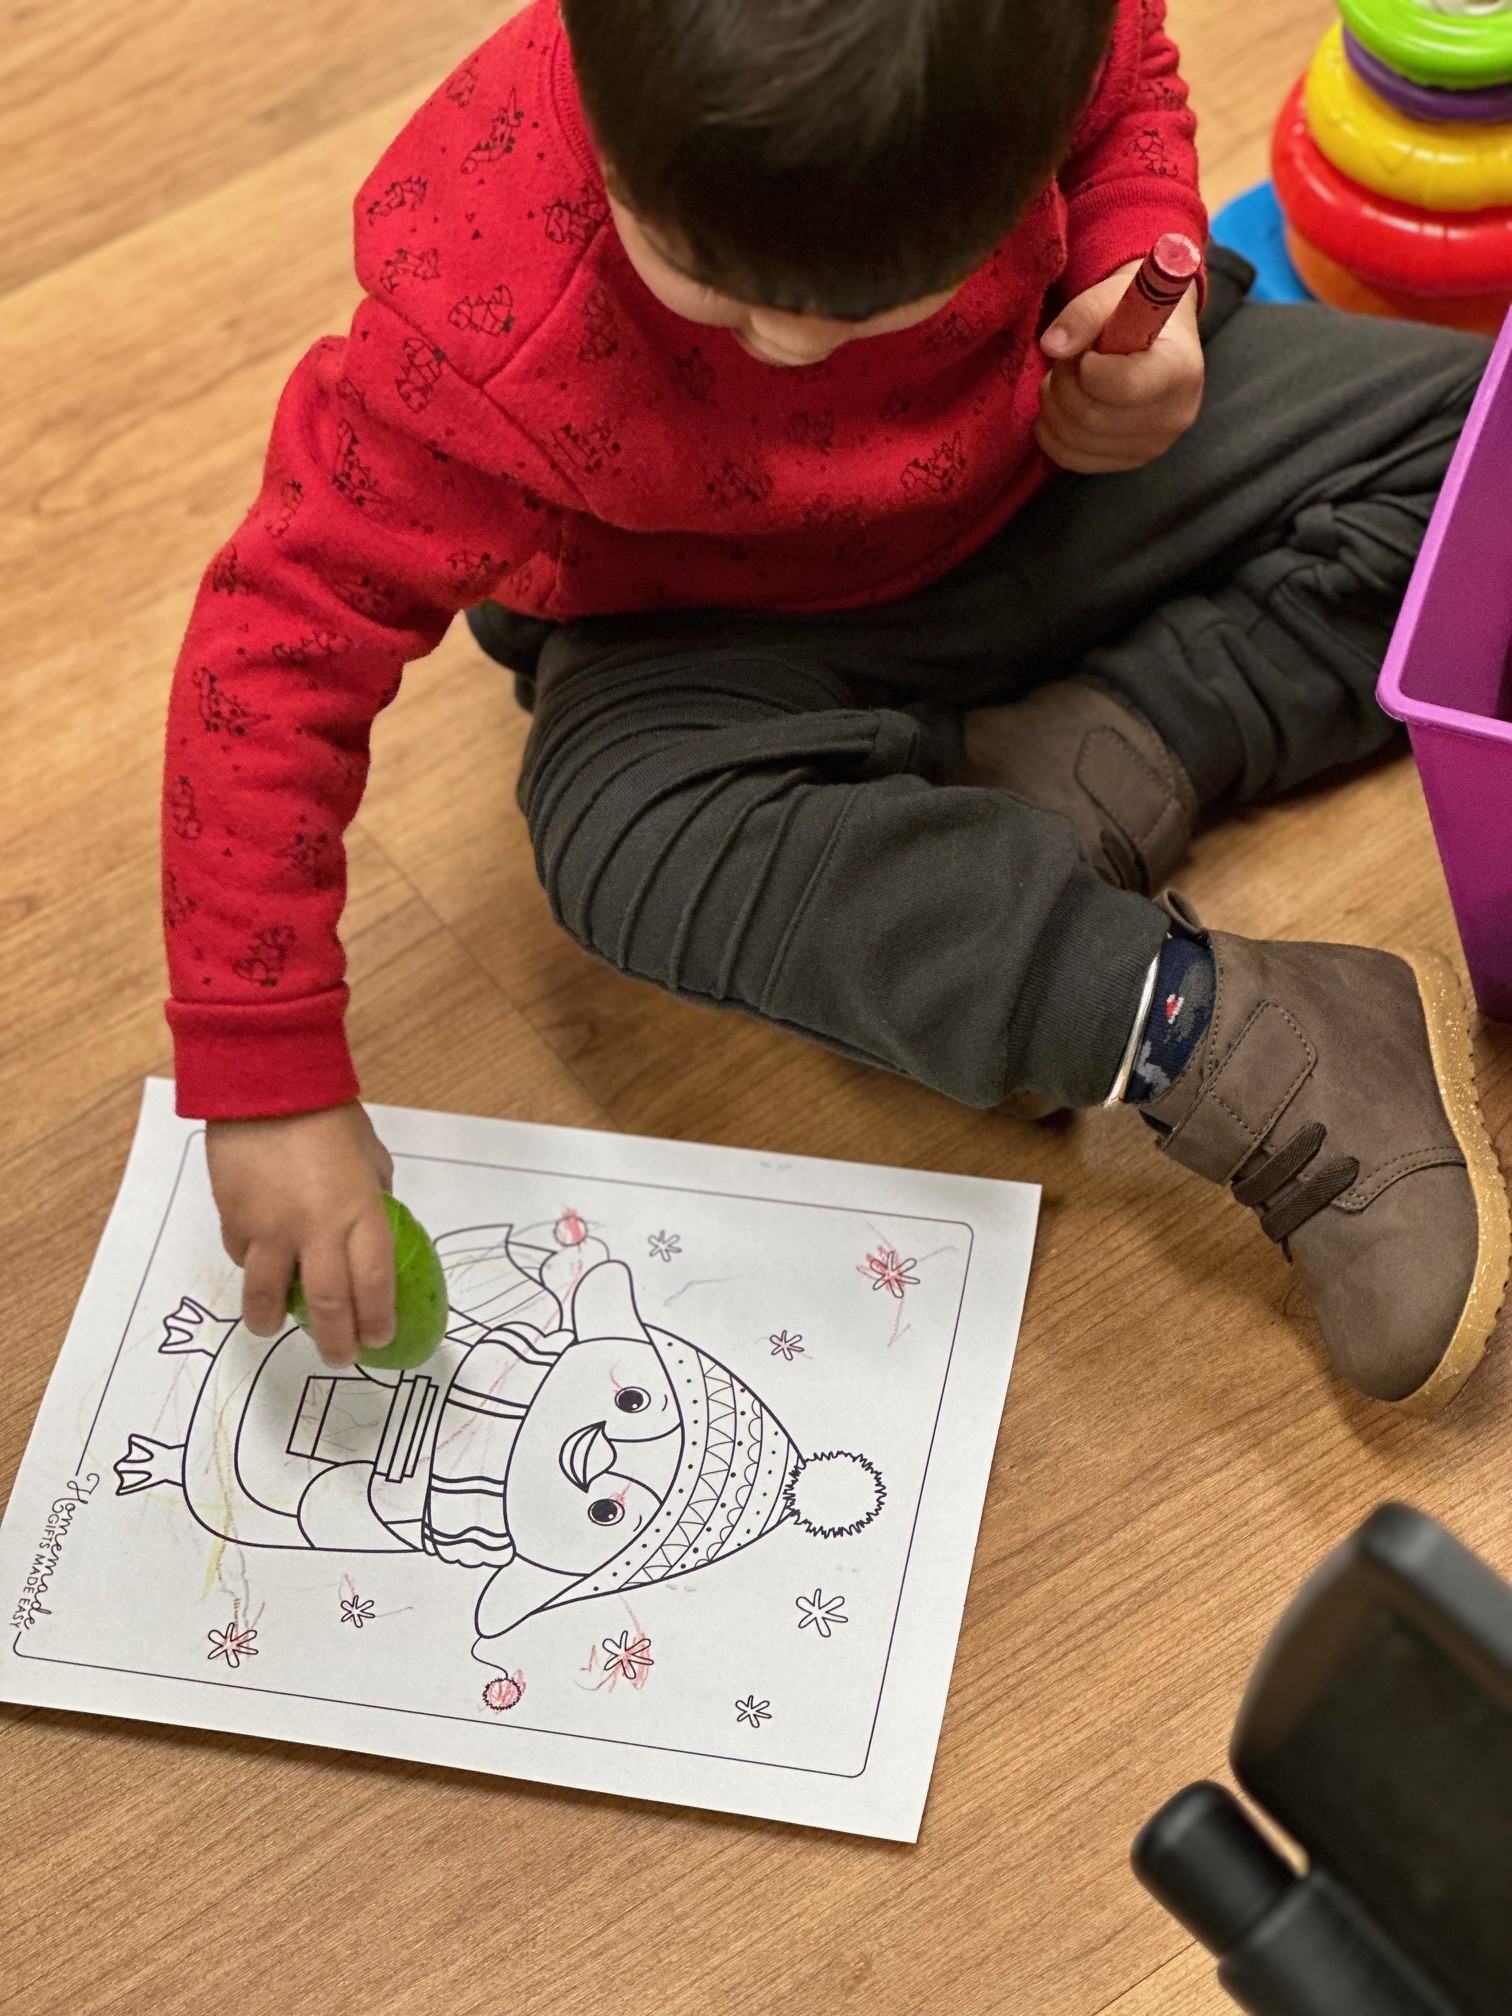 Child in red shirt coloring during story time